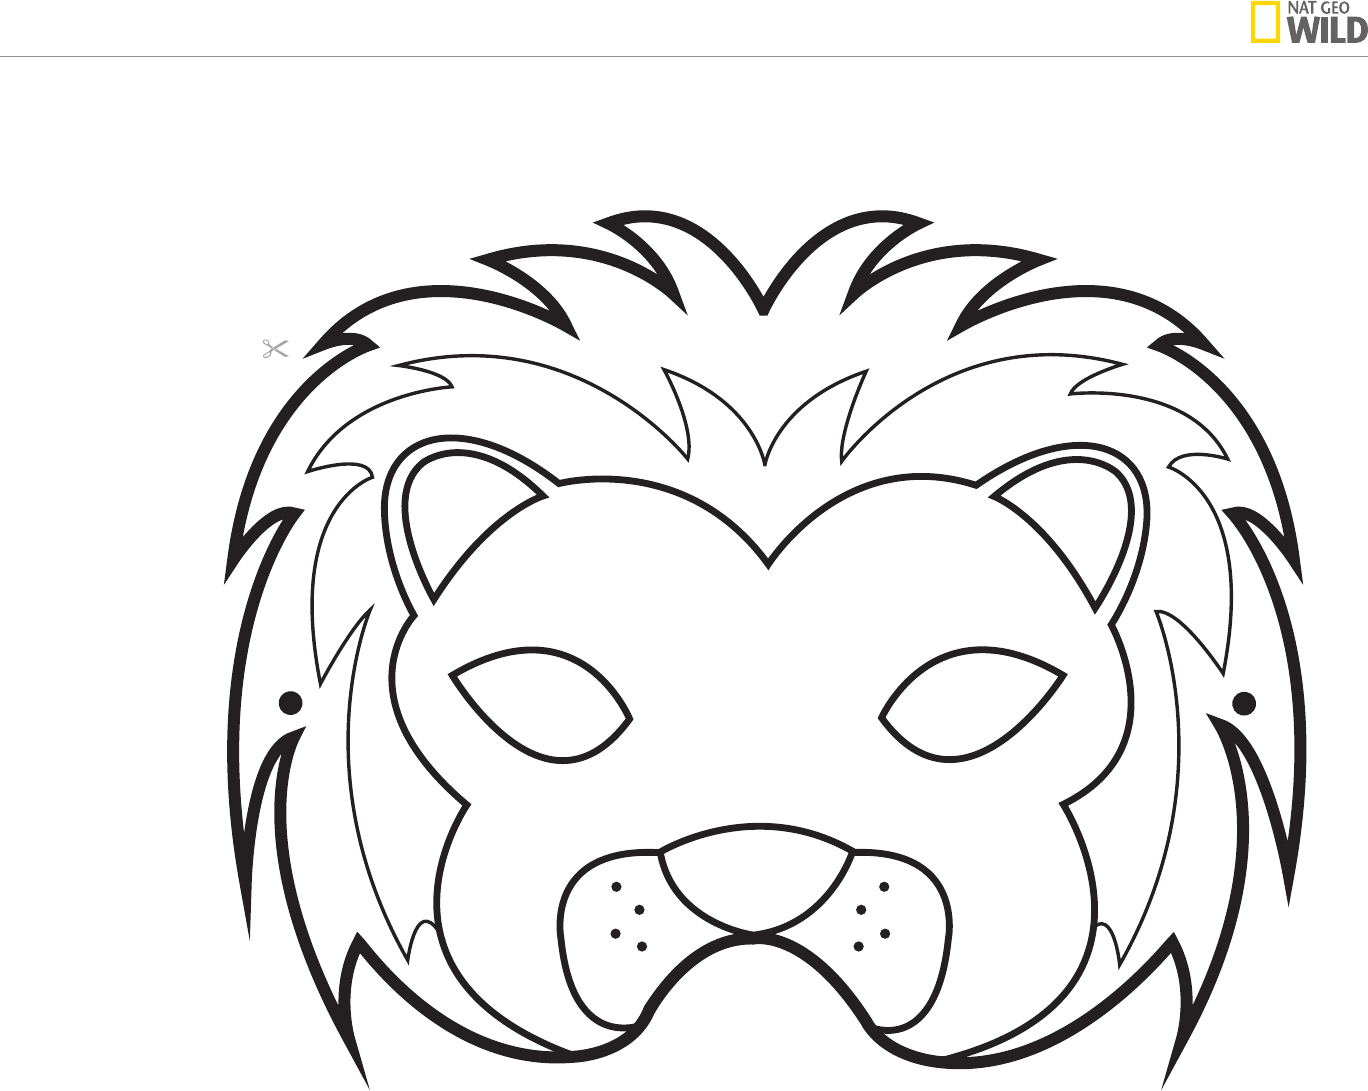 free-animal-mask-template-pdf-114kb-4-page-s-page-3